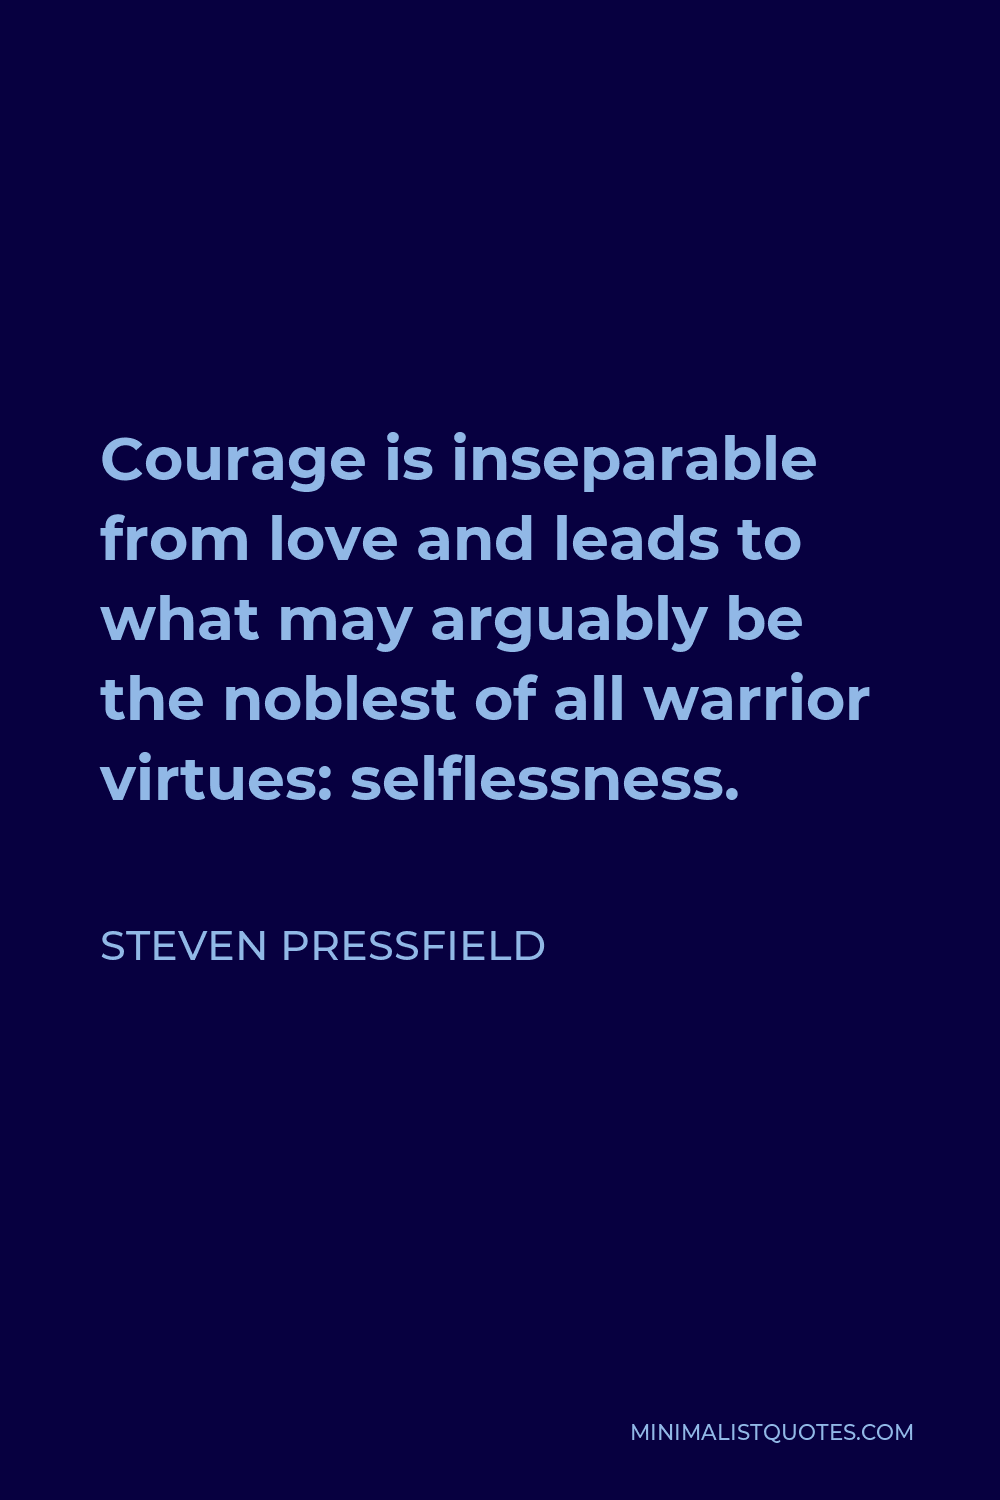 Steven Pressfield Quote - Courage is inseparable from love and leads to what may arguably be the noblest of all warrior virtues: selflessness.